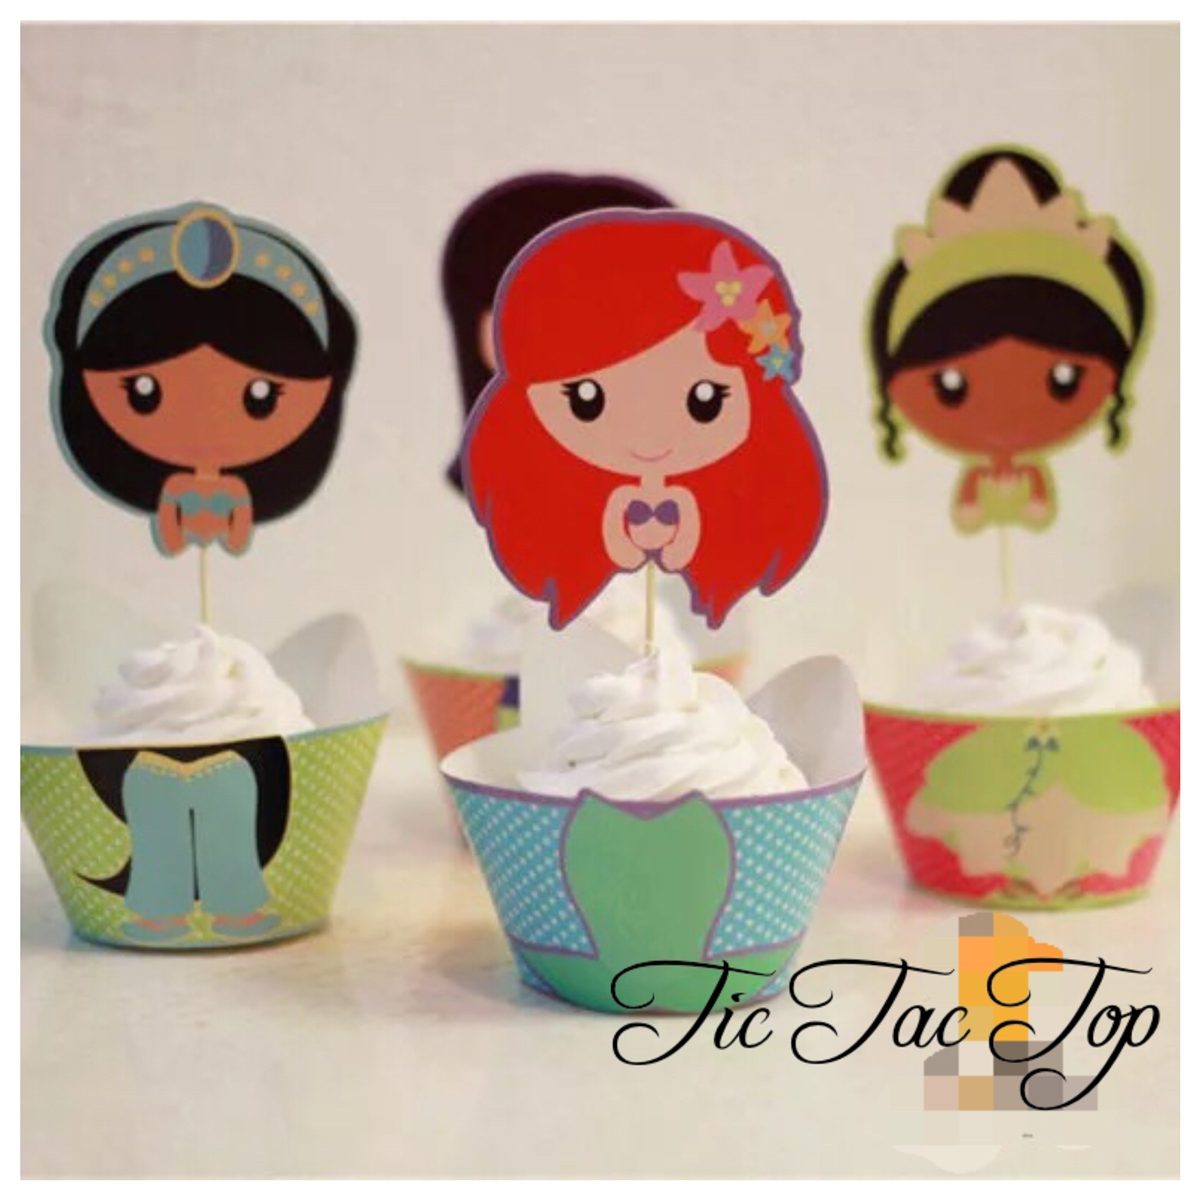 Disney Princesses SPECIAL EDITION Cupcake Wrappers + Toppers